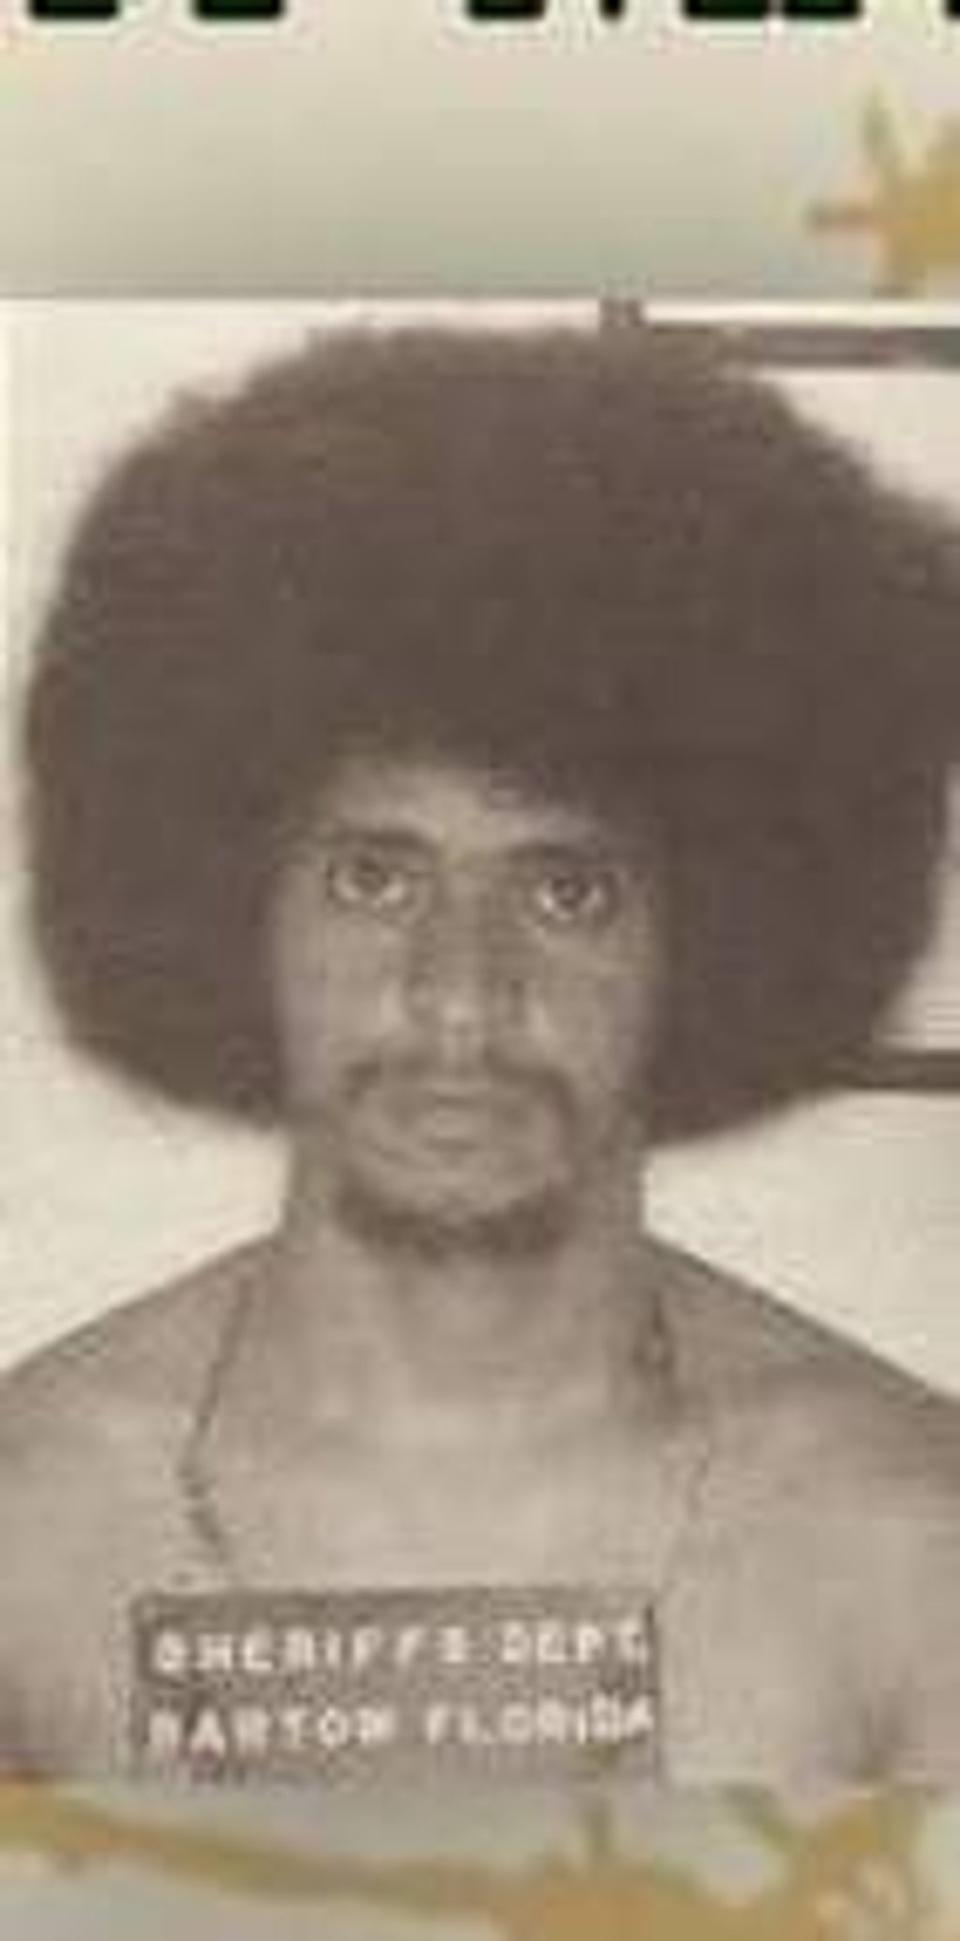 A juror said that a photo of Juan Melendez with an afro convinced her he was guilty, sending him to death row for a crime he didn’t commit. (Courtesy of Judi Caruso)